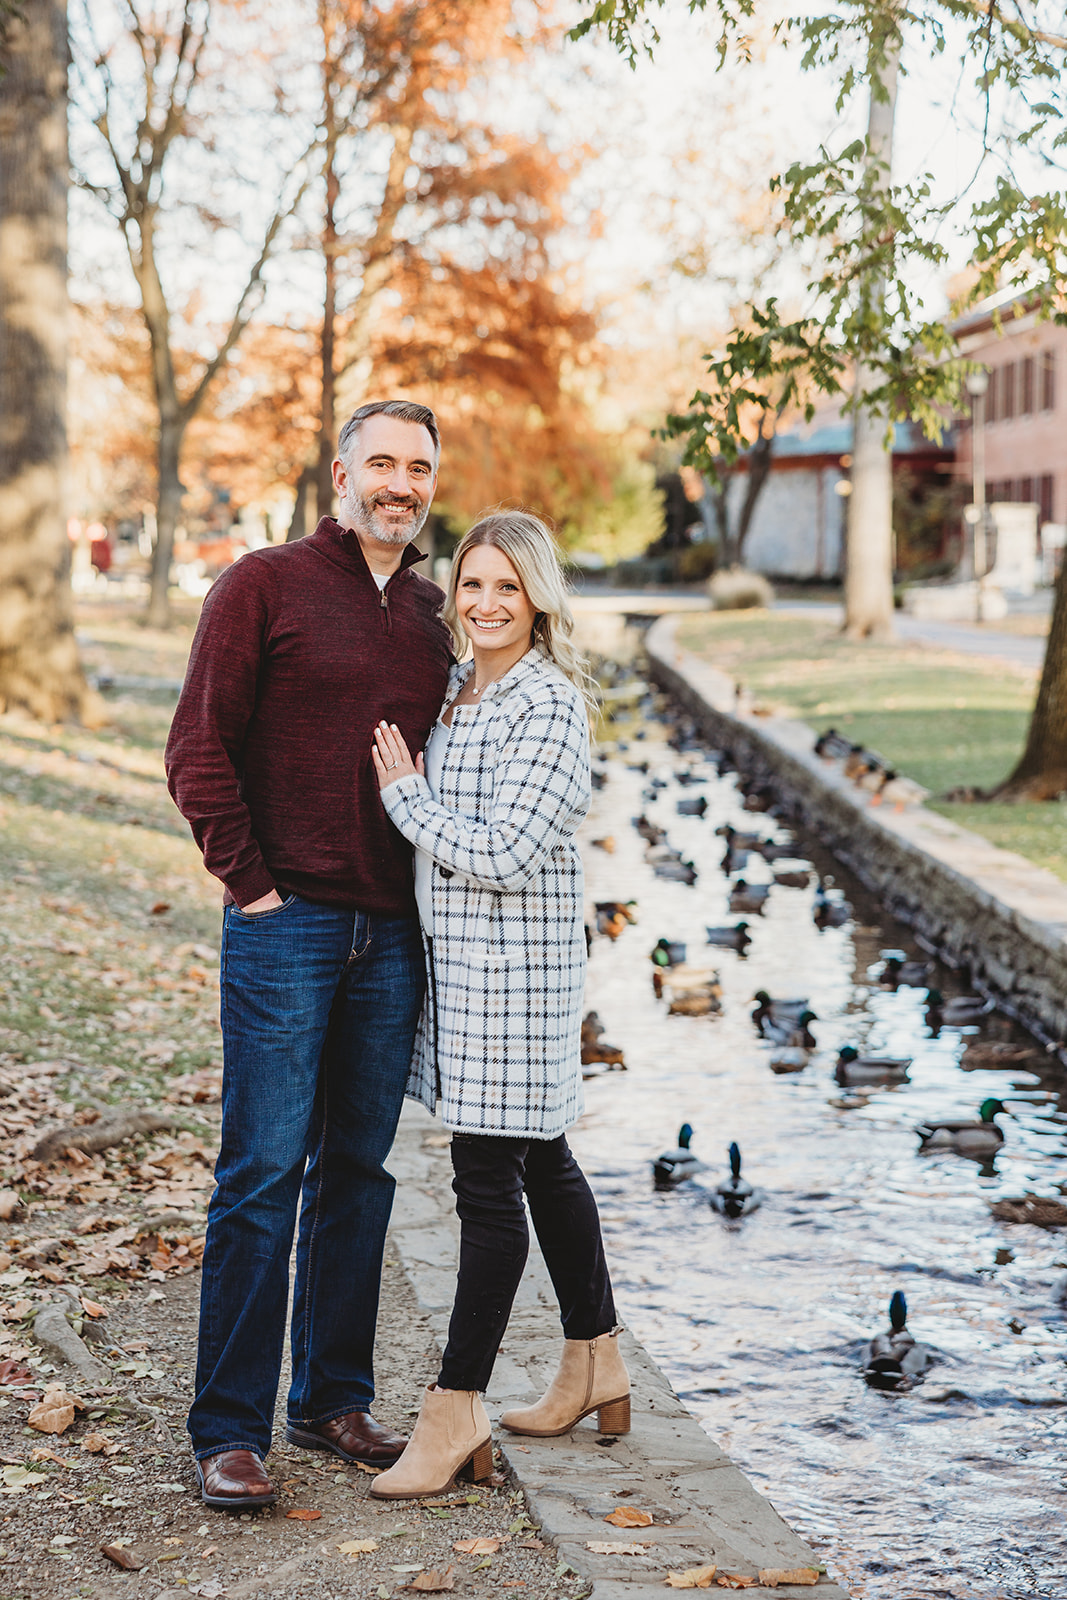 outdoor fall engagement session at Lititz Springs Park in central Pennsylvania Wilbur Buds railroad tracks ducks